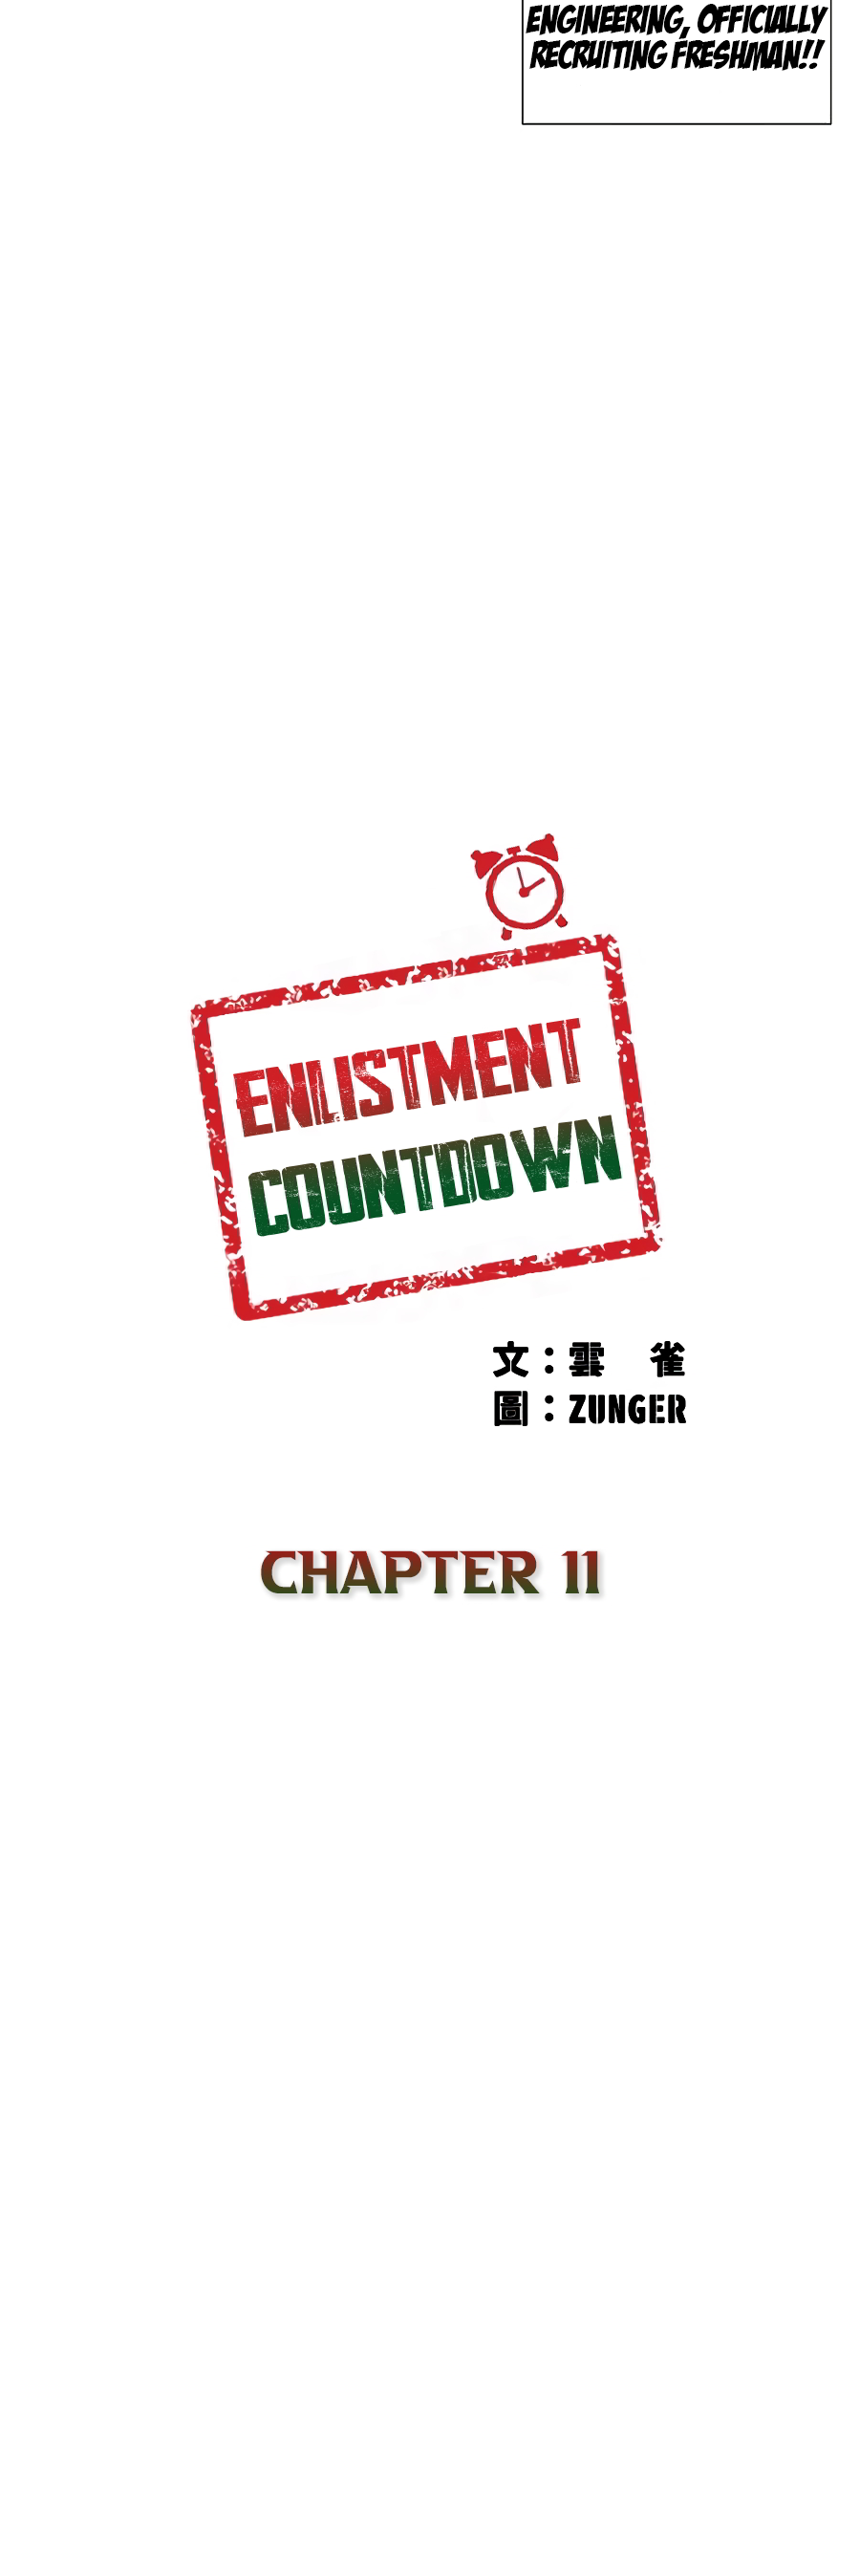 Enlistment Countdown - Page 3